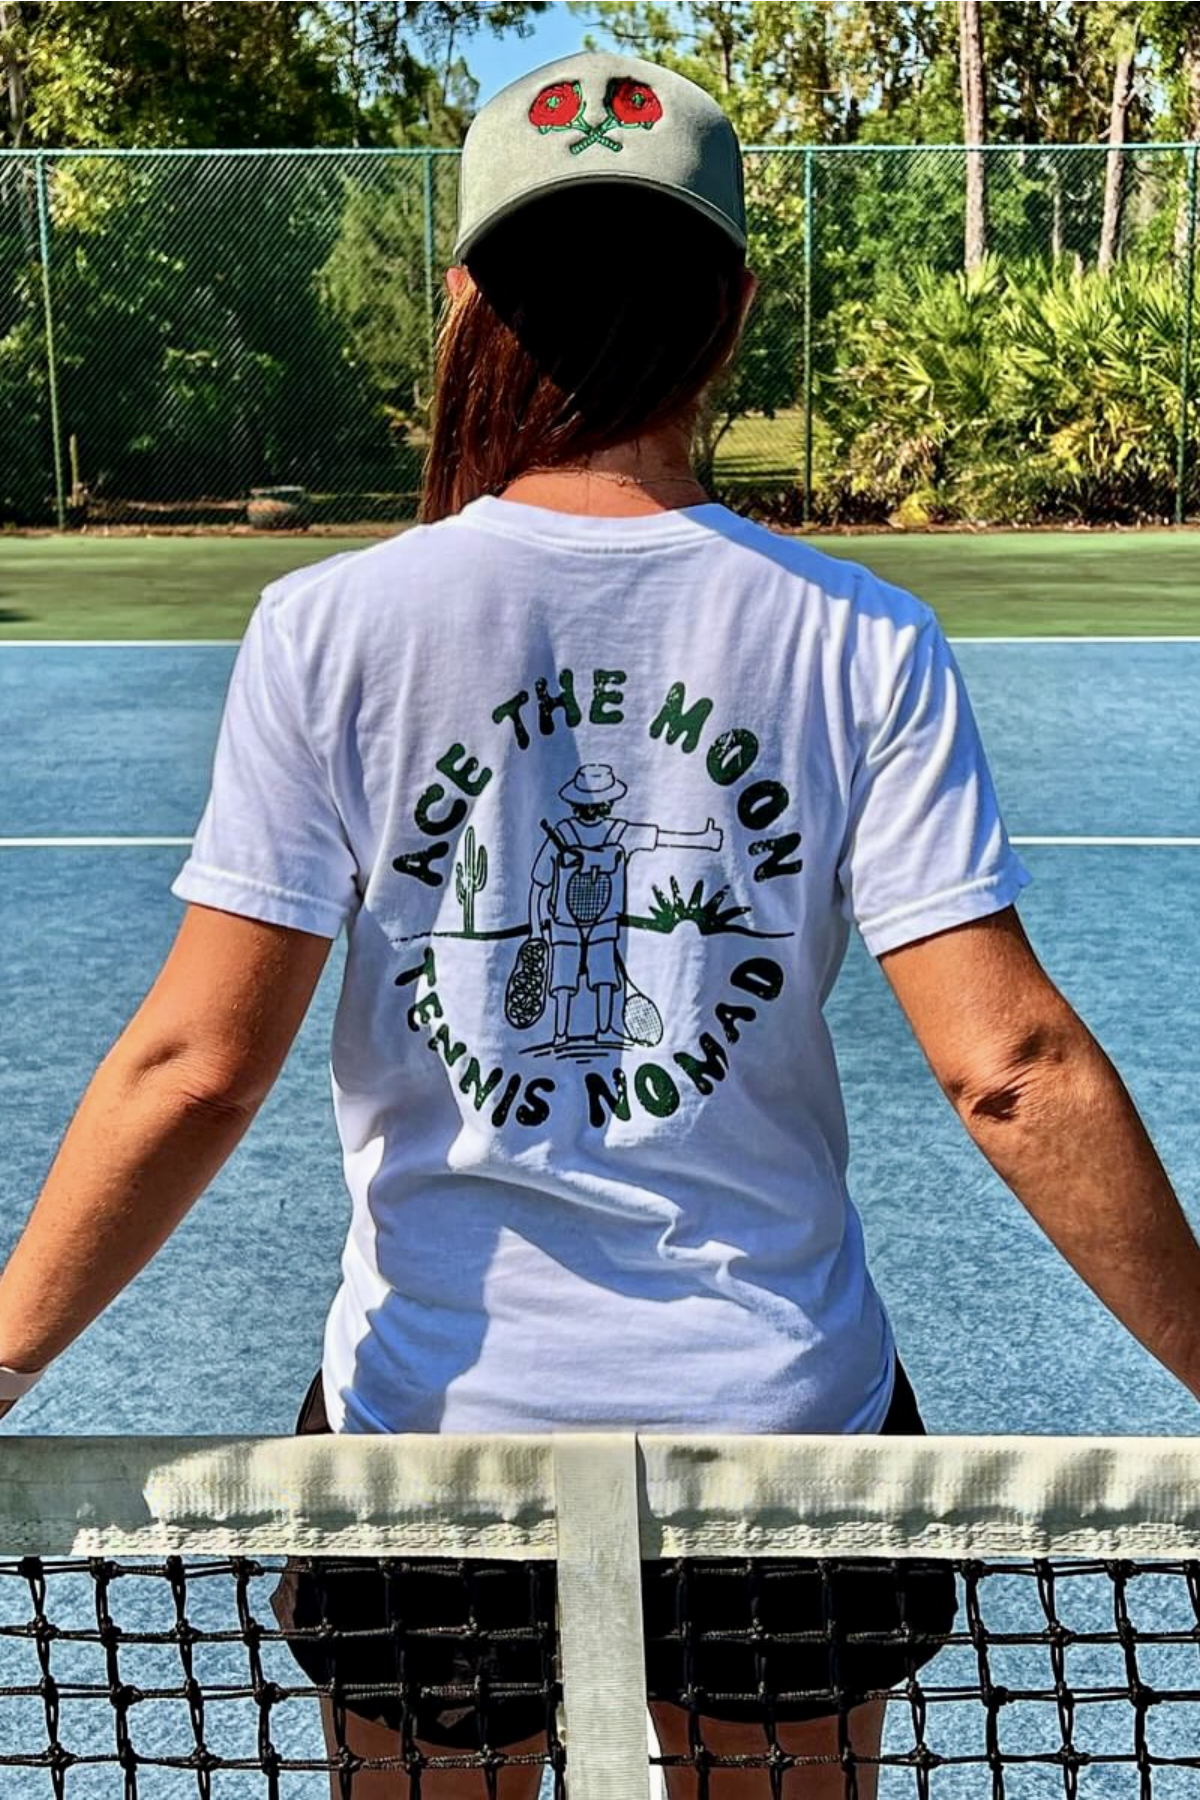 Tennis Nomad Tees in Green or White